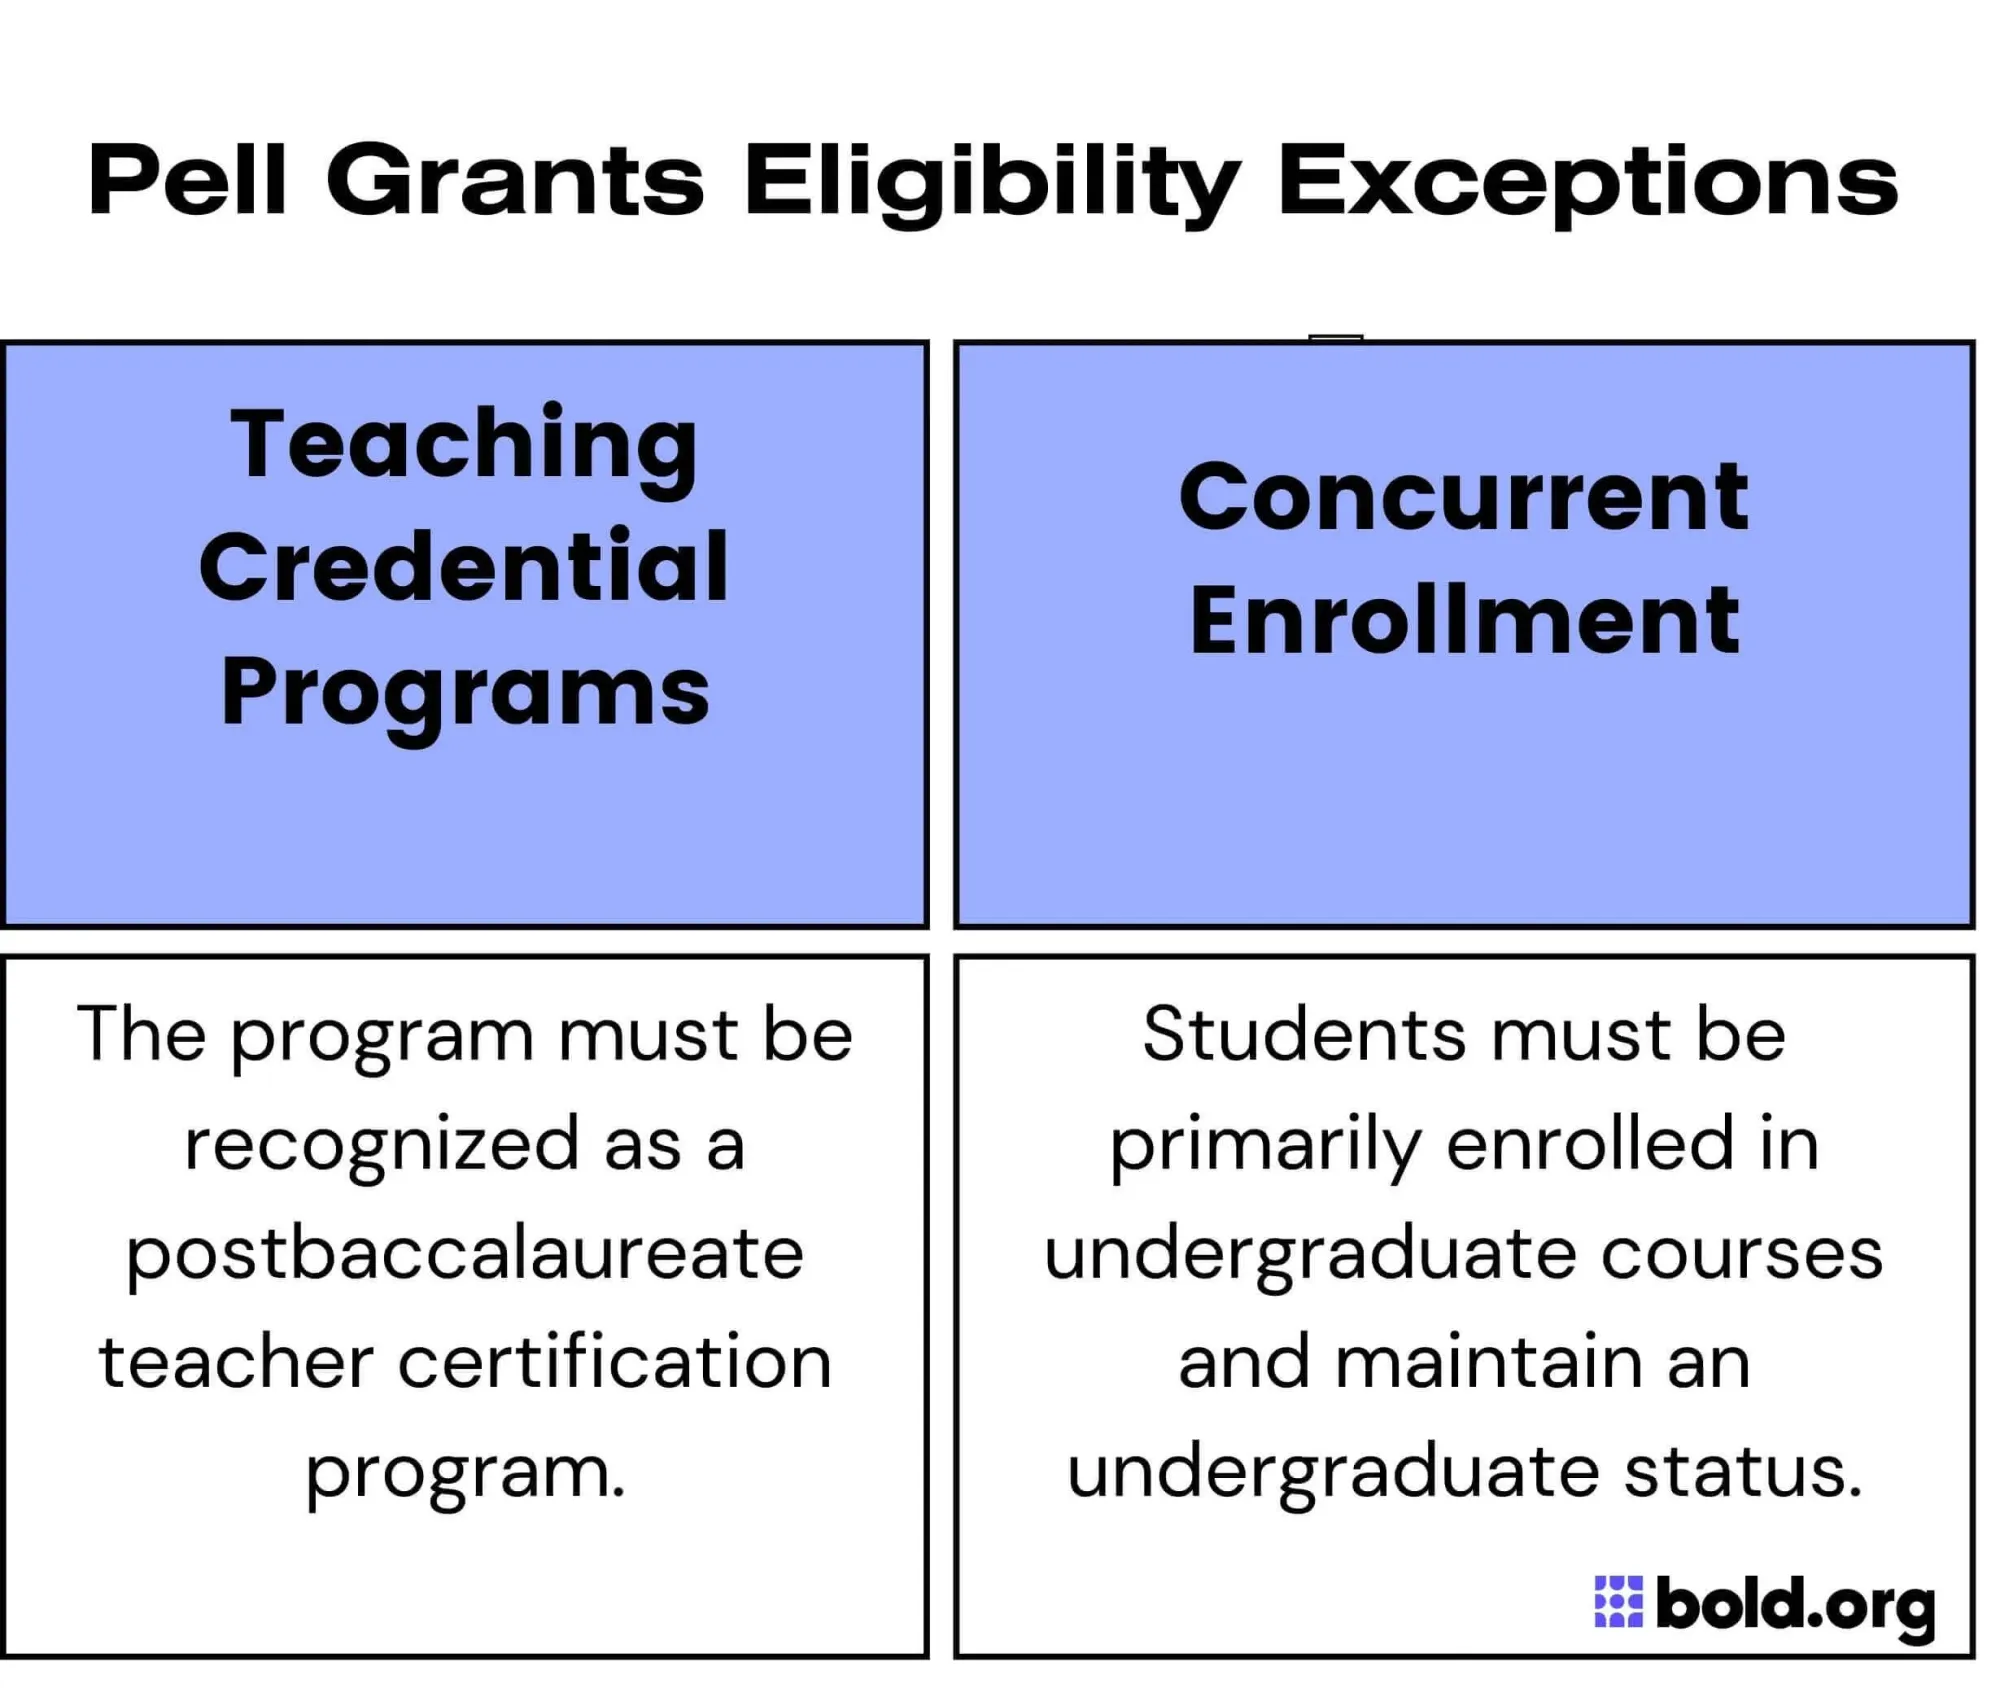 chart discussig grad school eligibilty exceptions for the pell grant